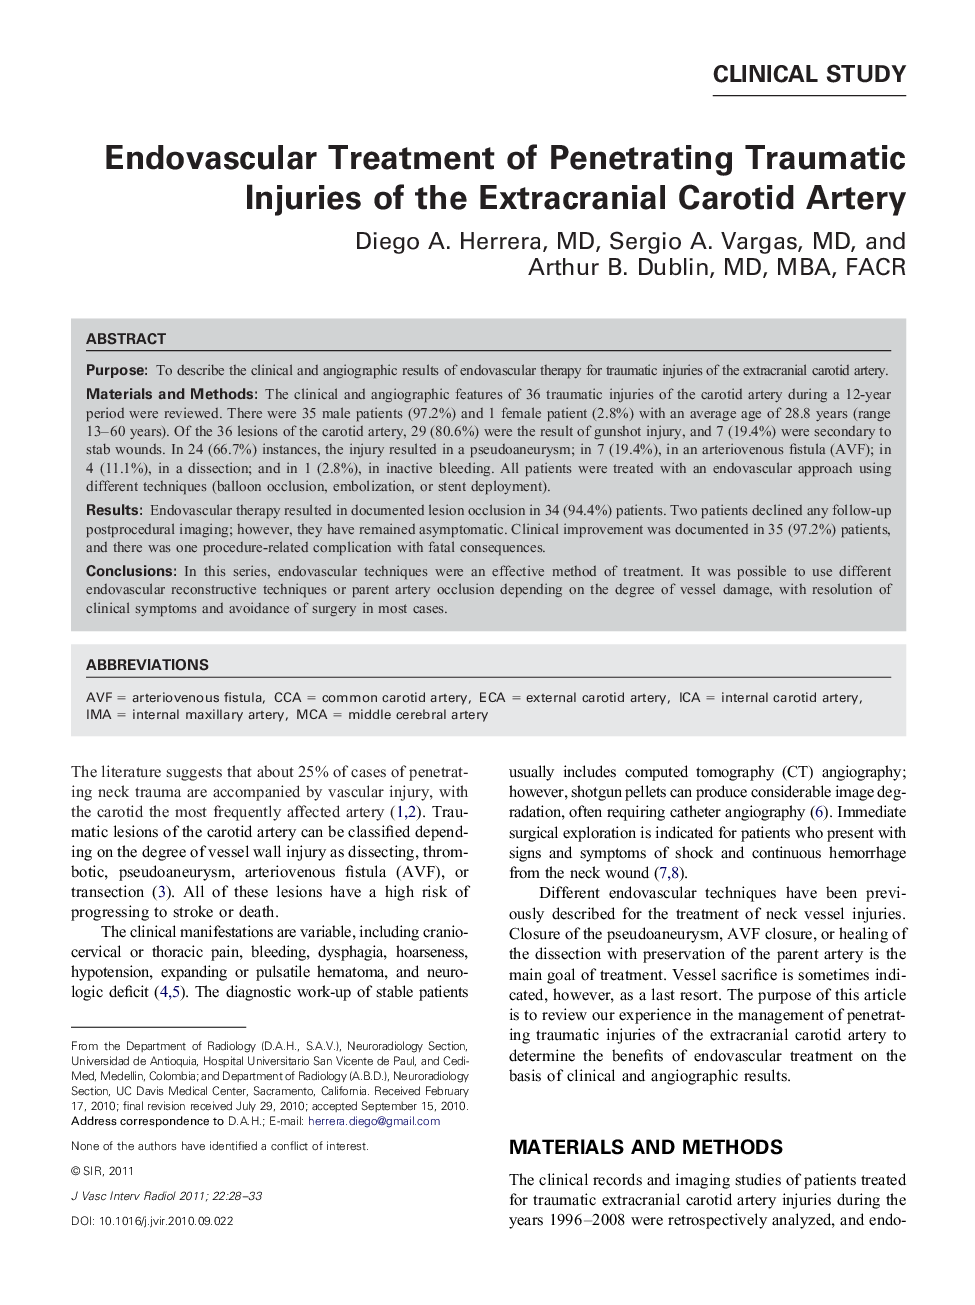 Endovascular Treatment of Penetrating Traumatic Injuries of the Extracranial Carotid Artery